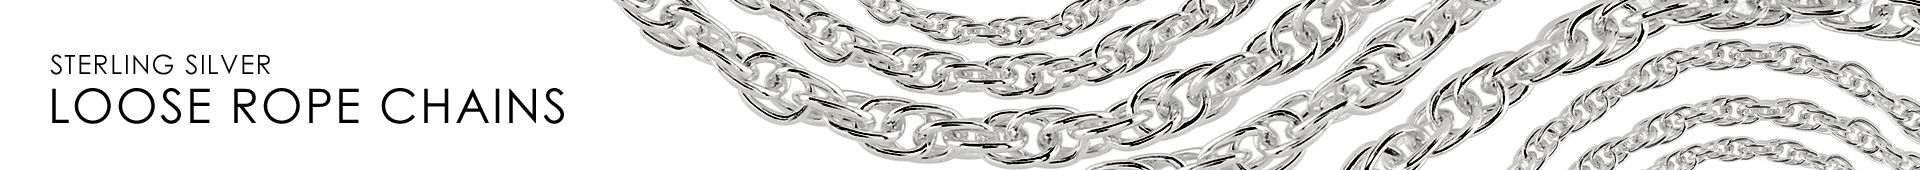 Sterling Silver Prince of Wales Loose Rope Chain